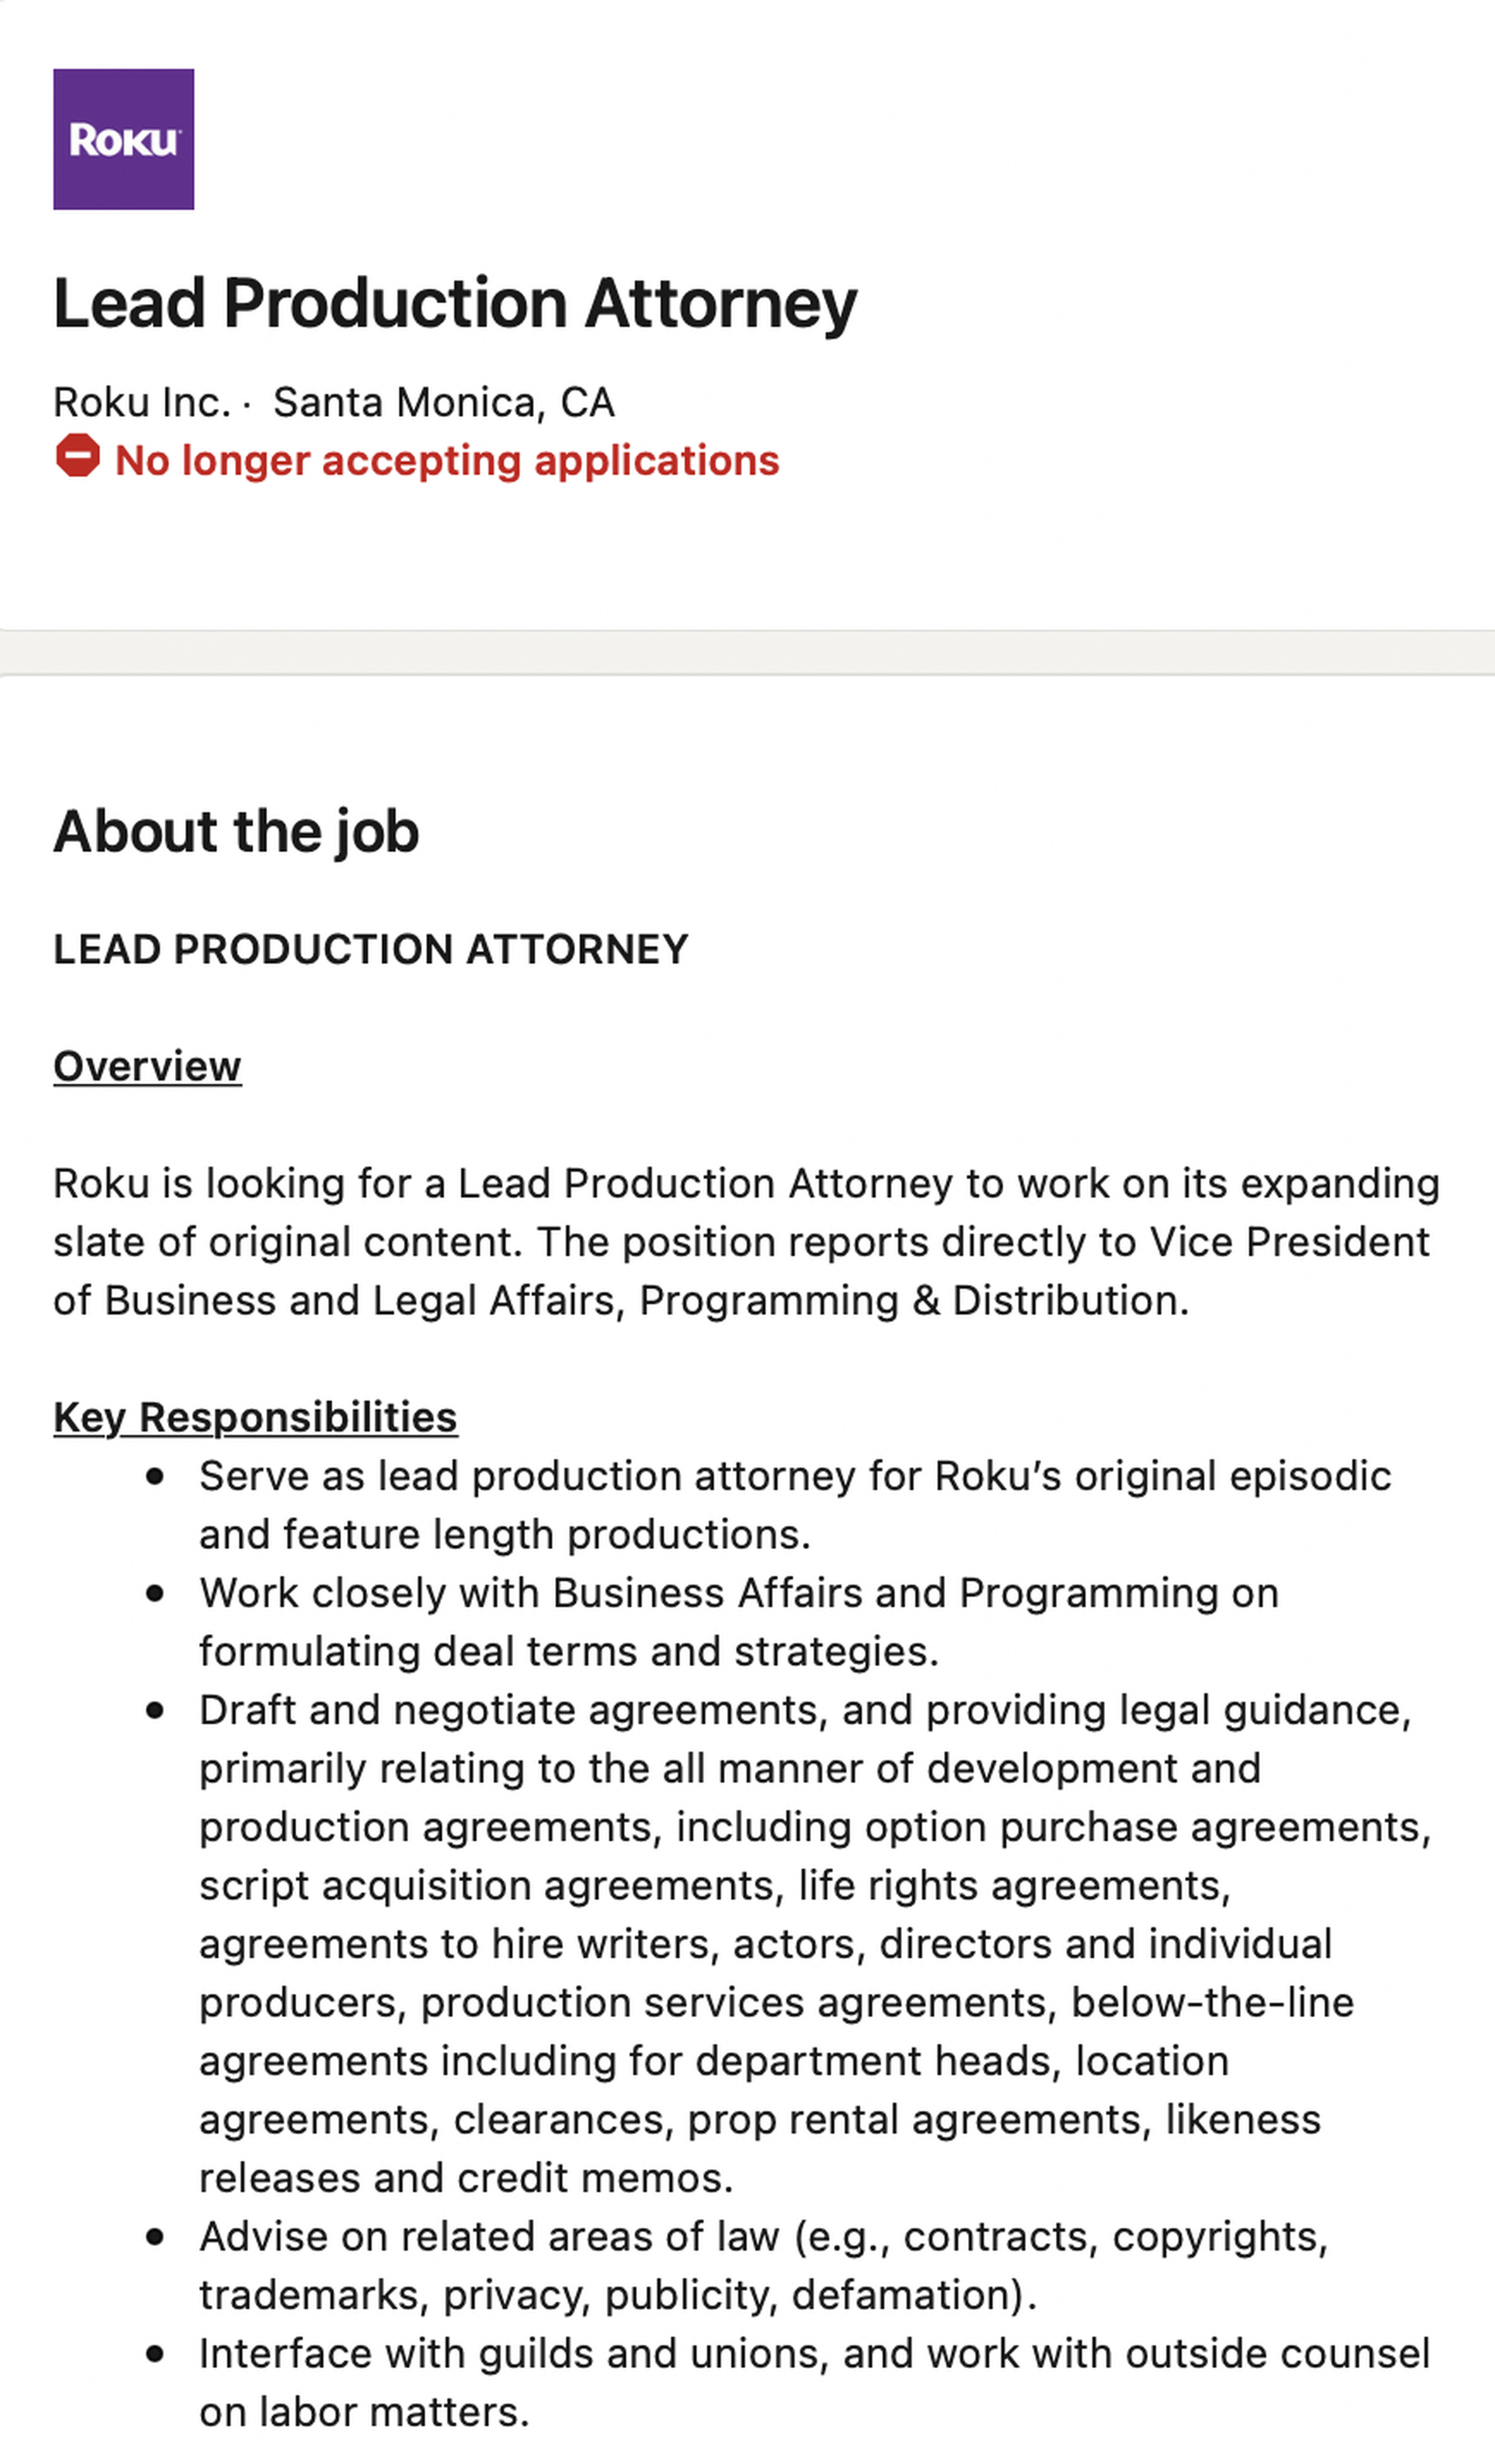 The job listing that mentions “original episodic and feature length productions.”